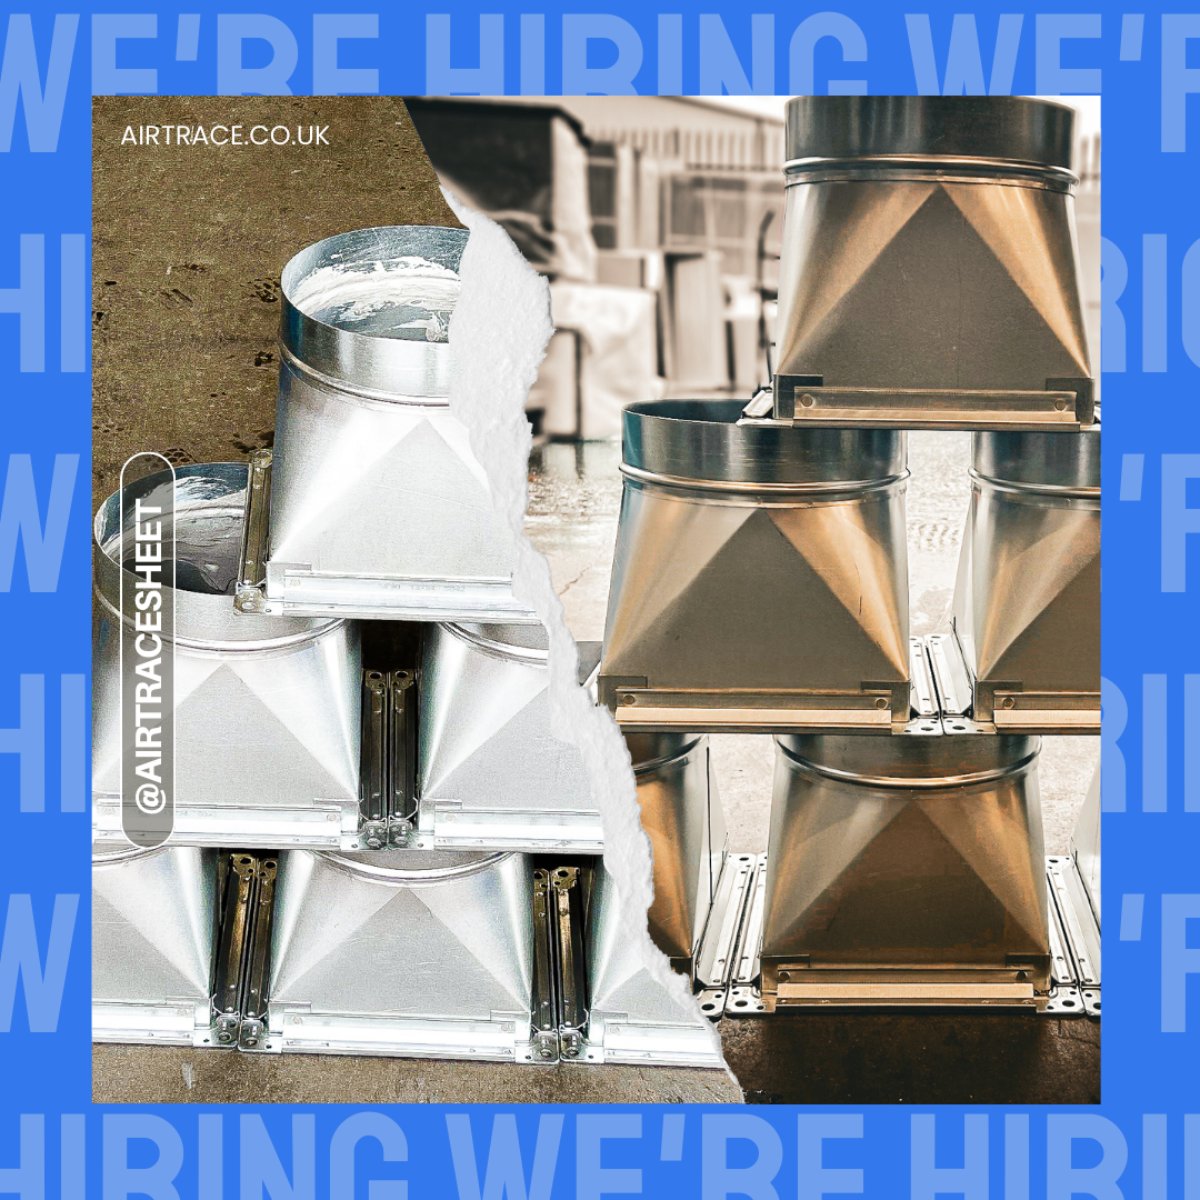 We're hiring a trainee ductwork assistant! If you want to join this great team and learn the skills to be able to match these fine examples, please apply to Indeed and send us your CV!
.
If You Can Draw It, We Can Make It.
.
#werehiring #applynow #sussexjobs #eastbournejobs